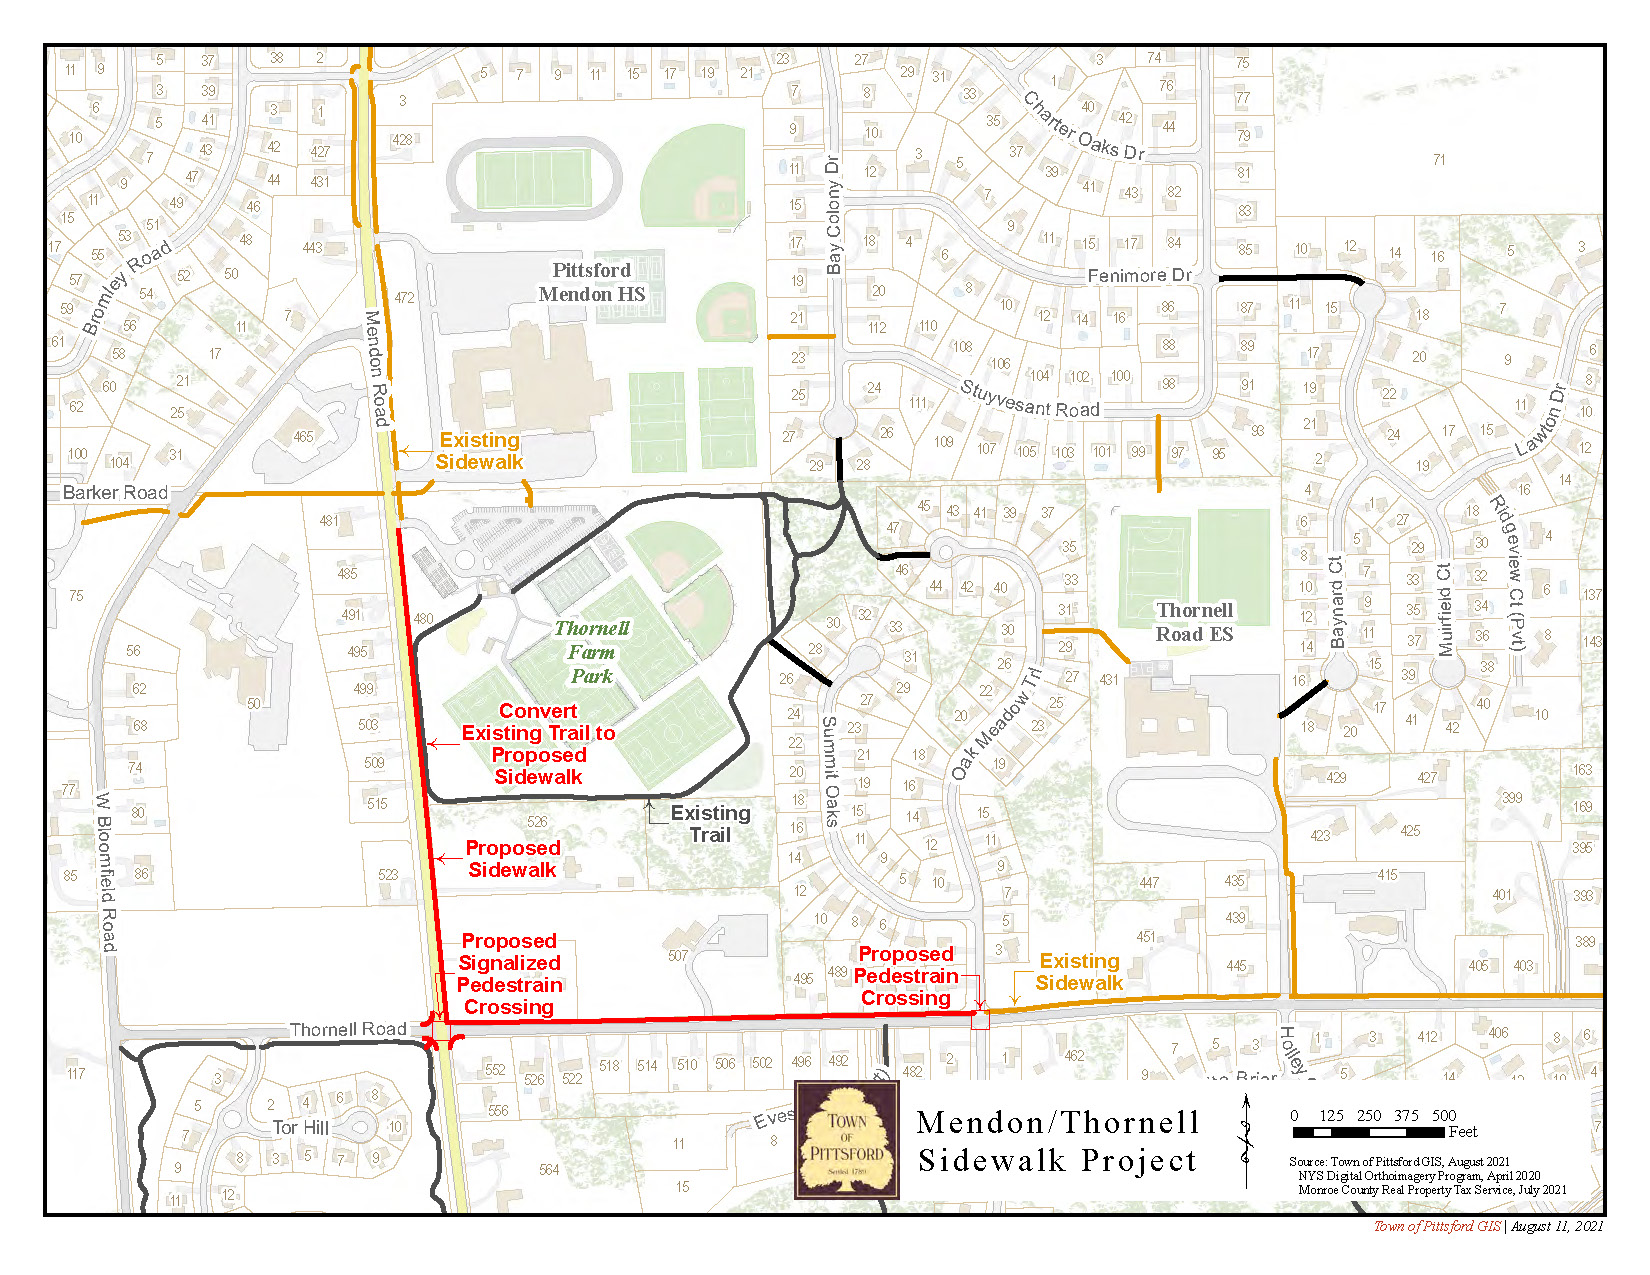 Map of Mendon-Thornell sidewalk project area